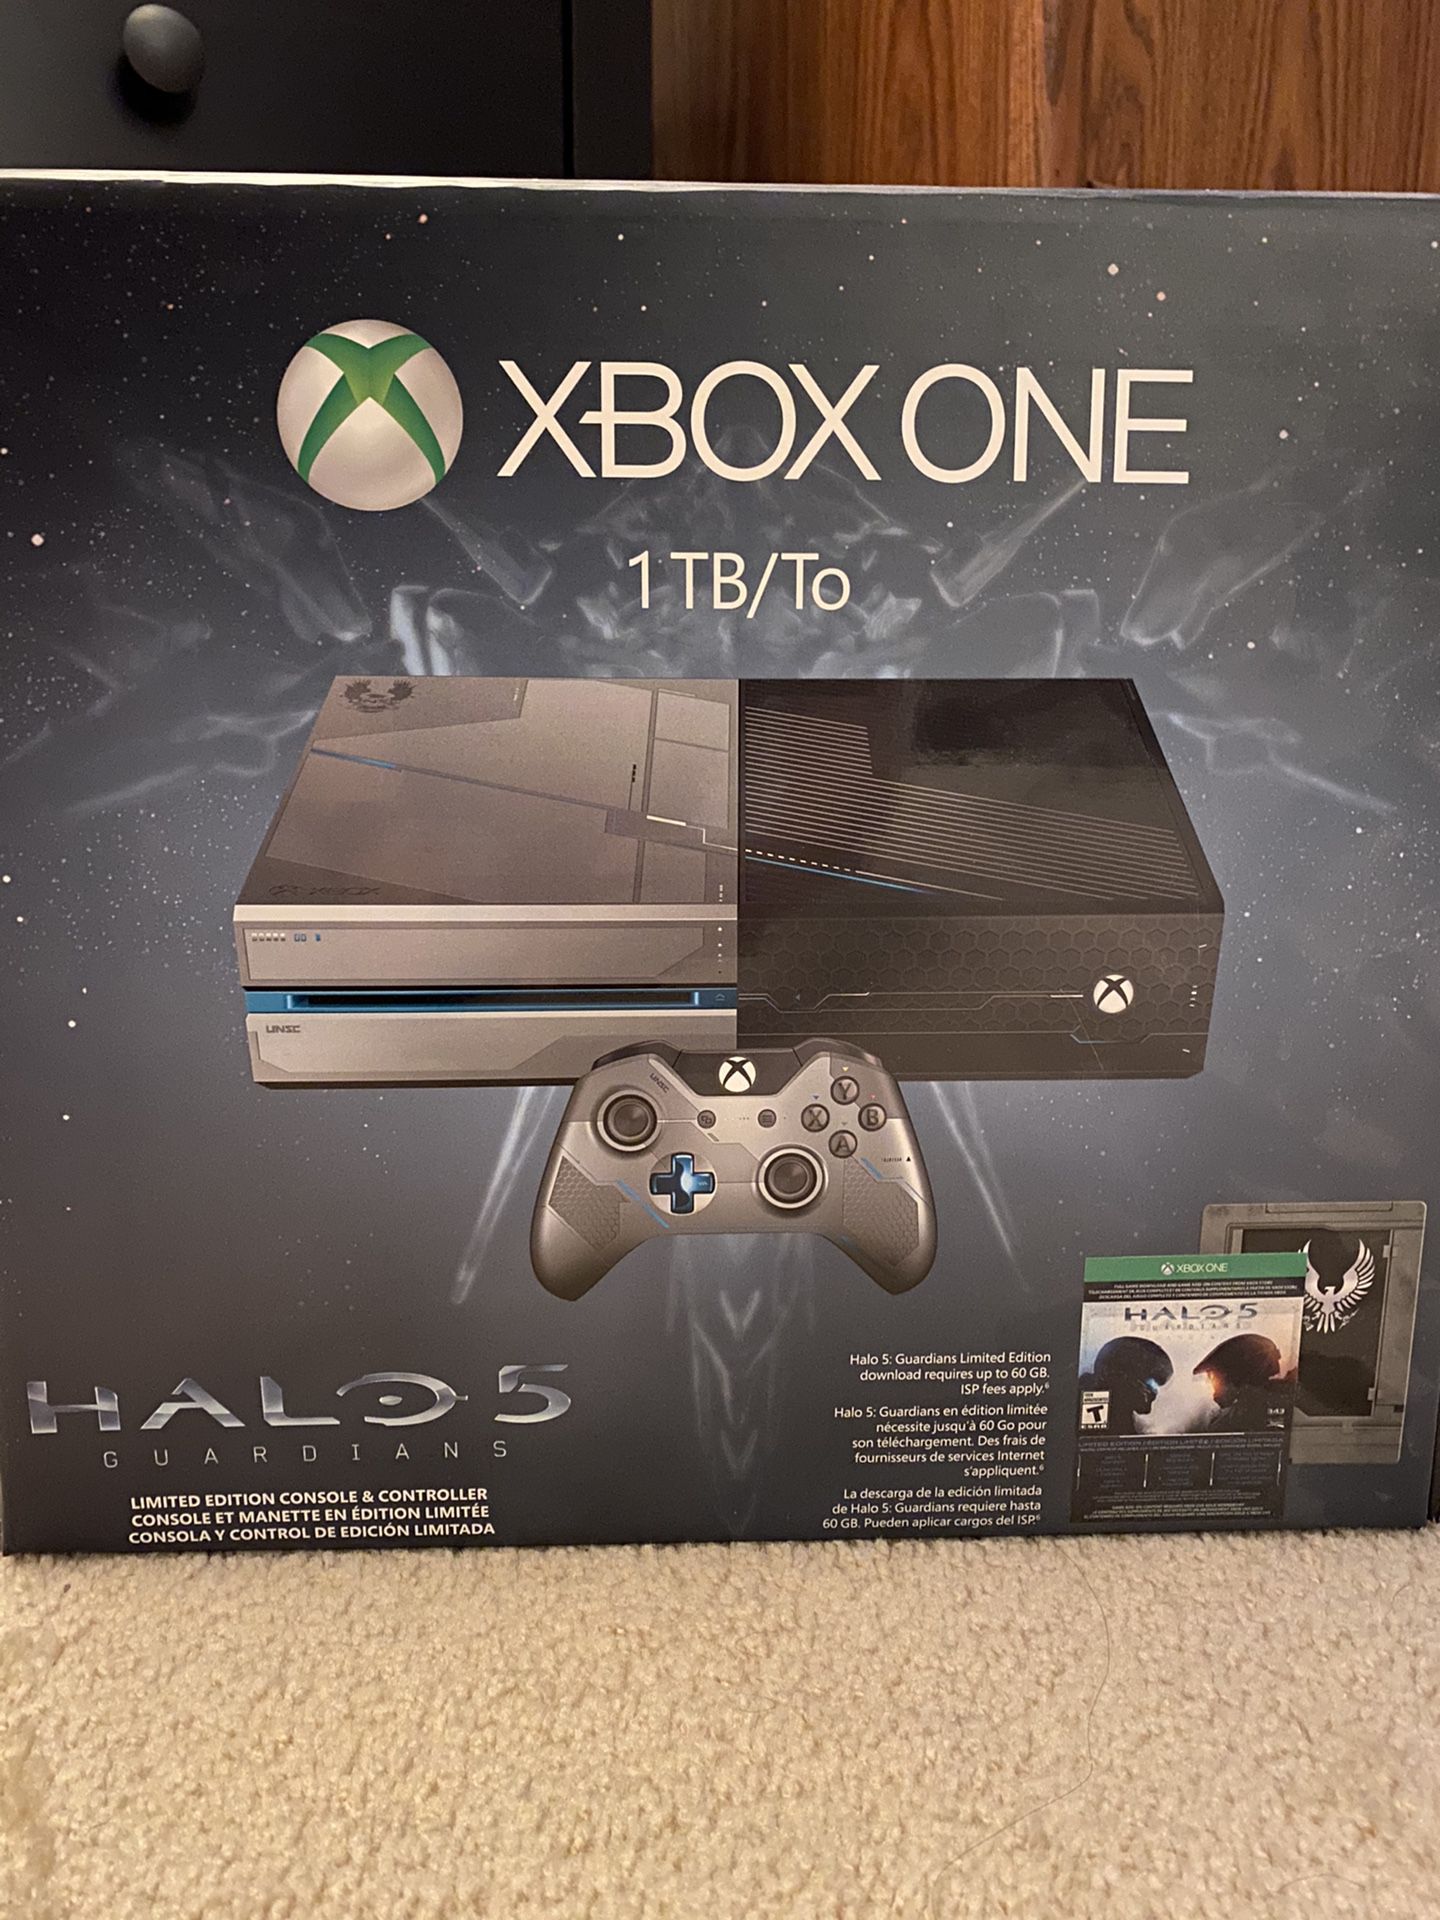 Xbox One 1TB | Halo 5 Guardians Limited Edition Console